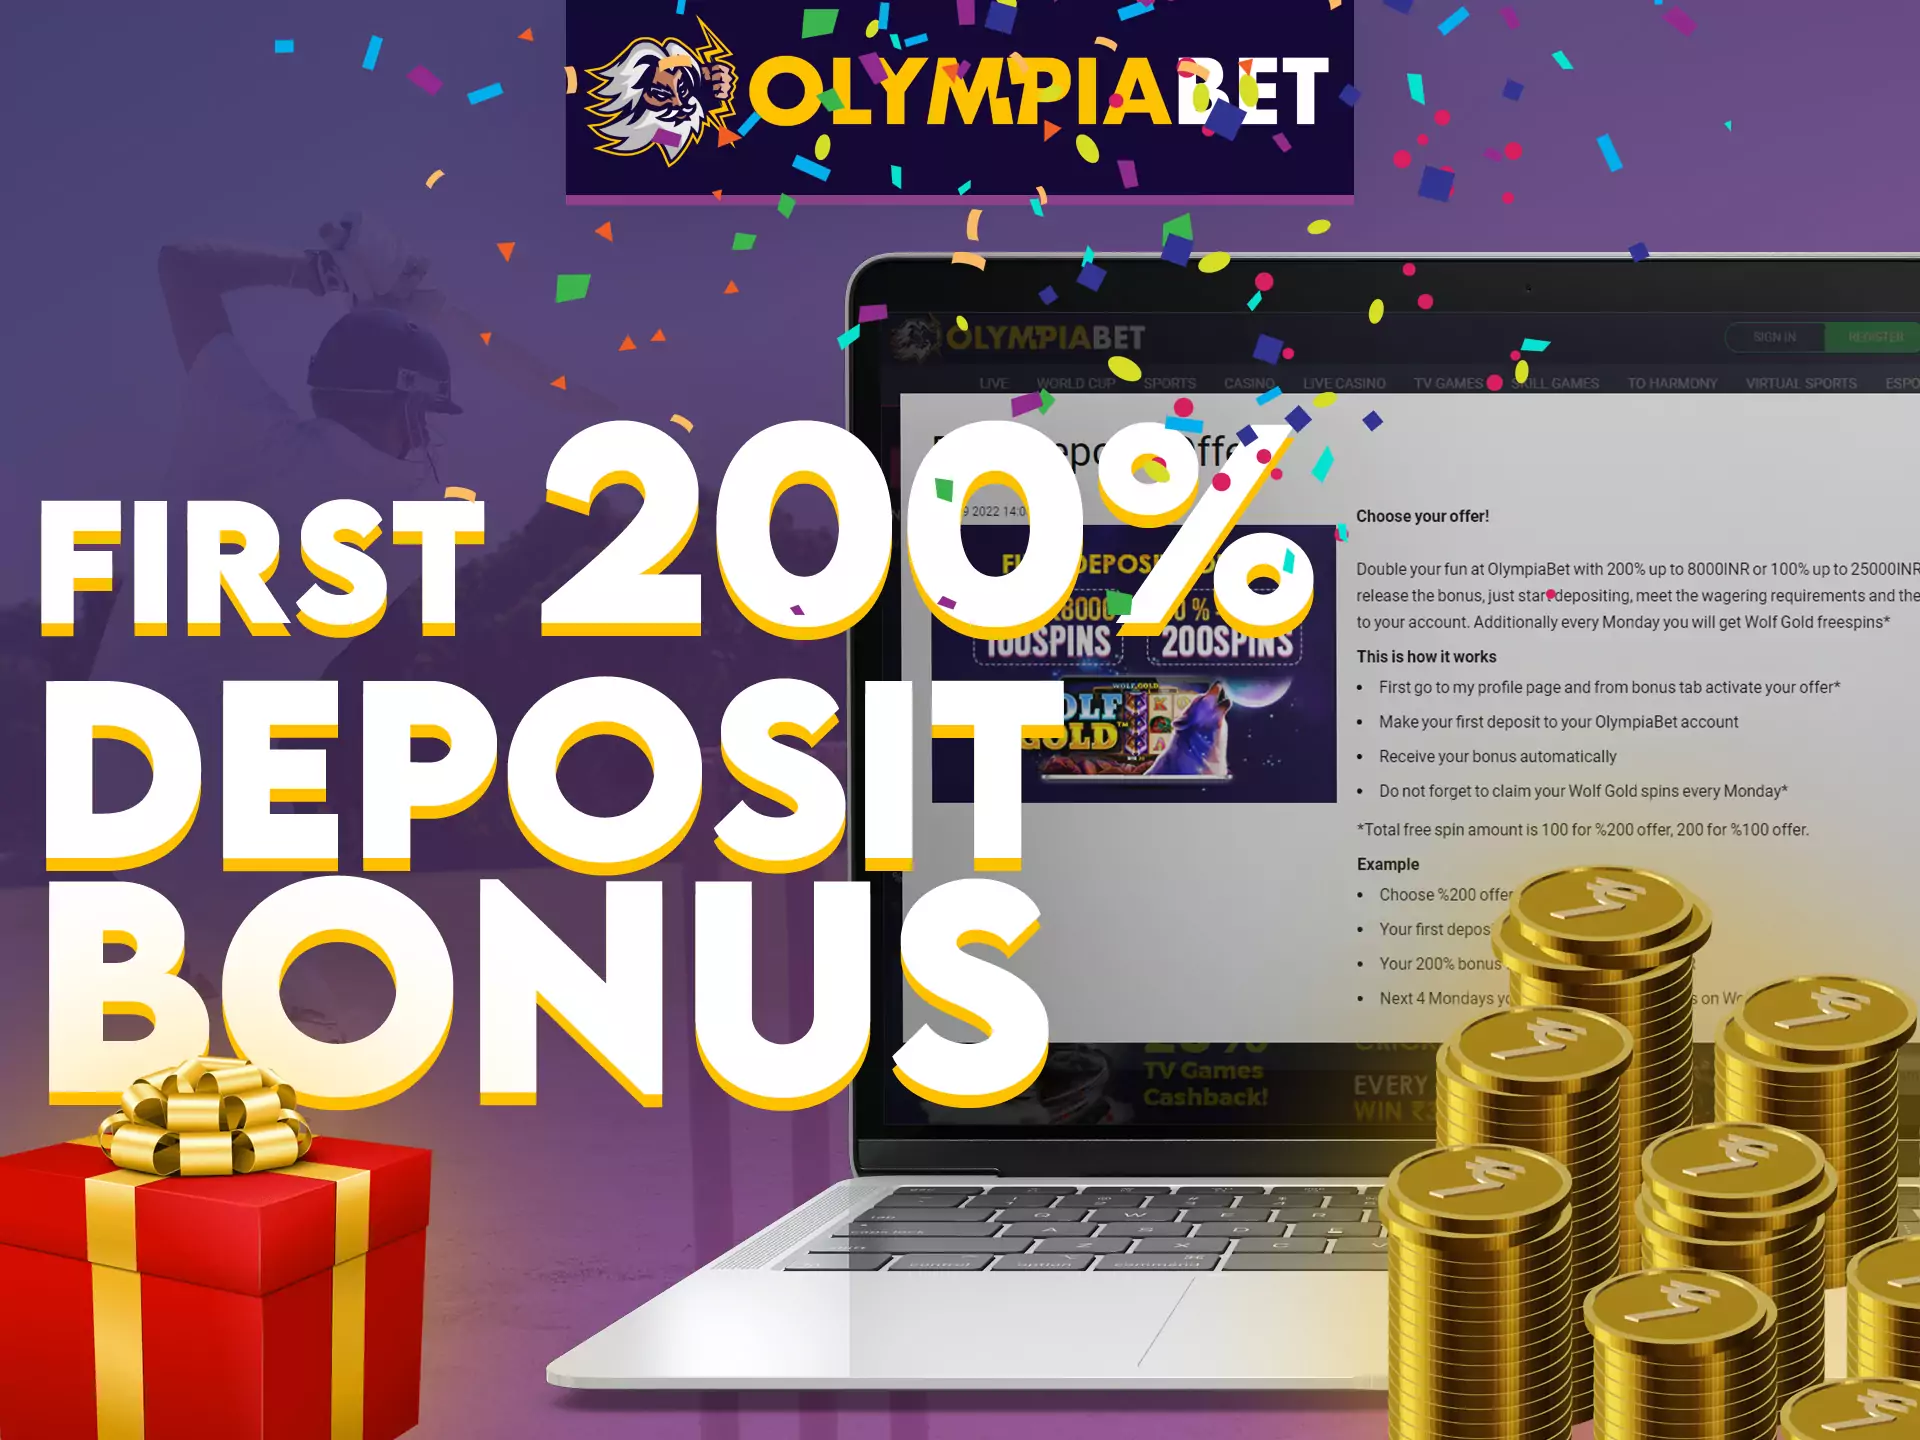 In the OlympiaBet app, get a special bonus for your first deposit.